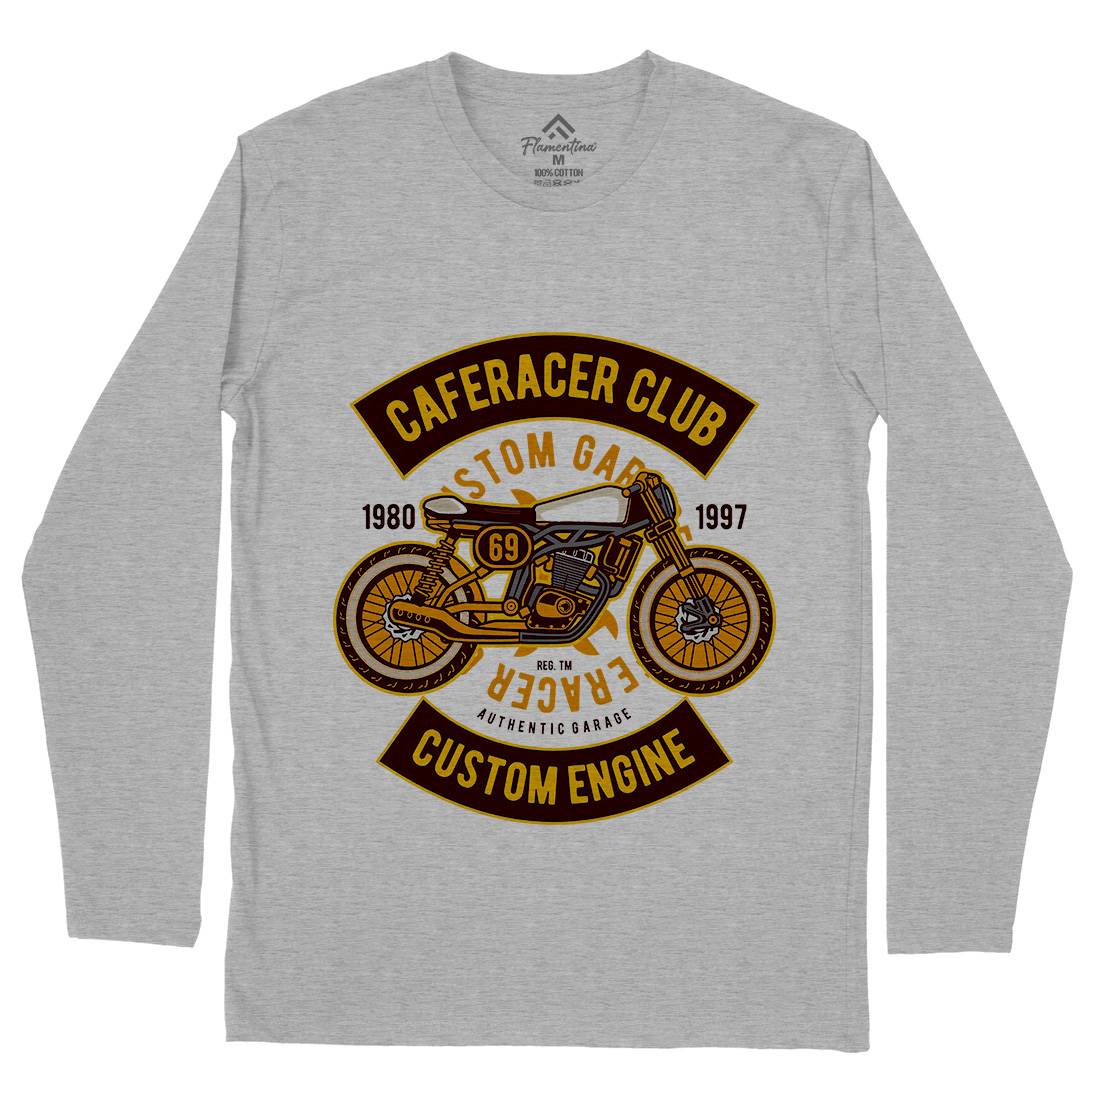 Caferacer Club Mens Long Sleeve T-Shirt Motorcycles D514